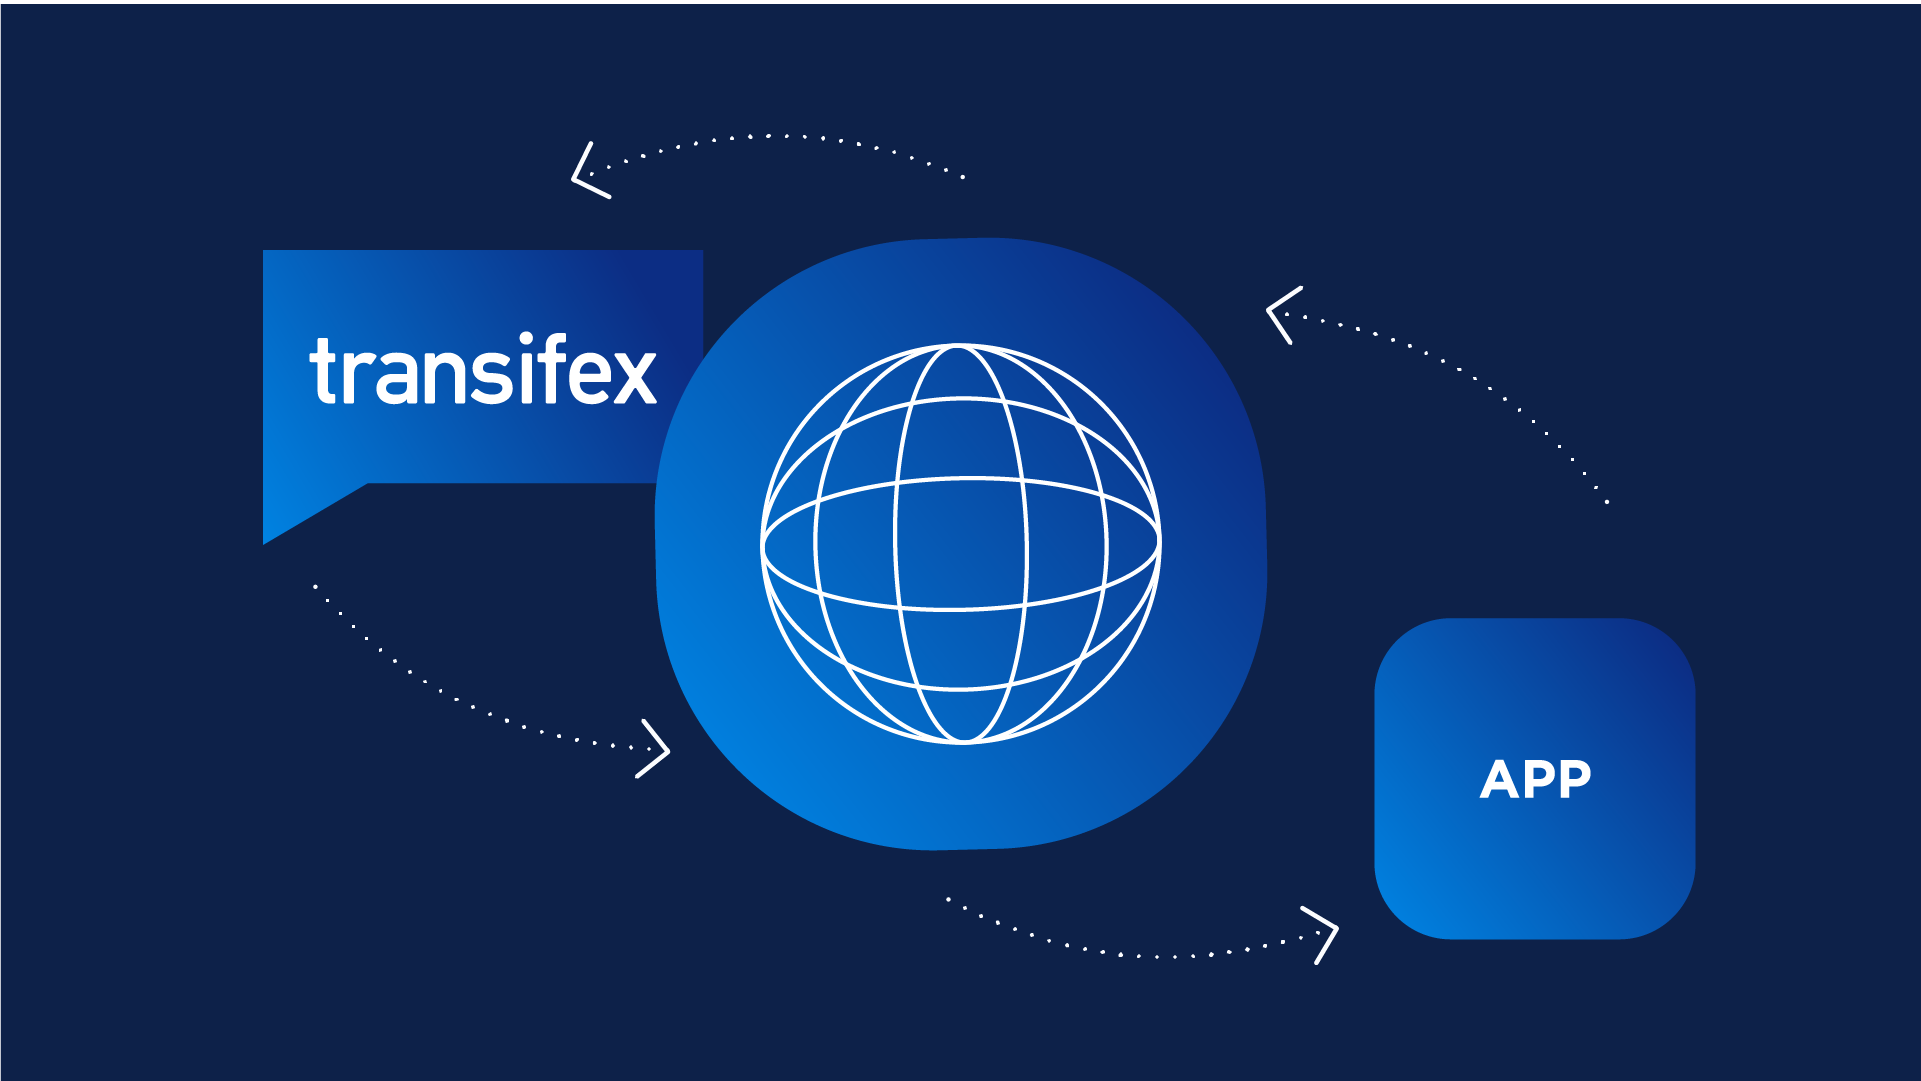 Transifex Content Delivery Service